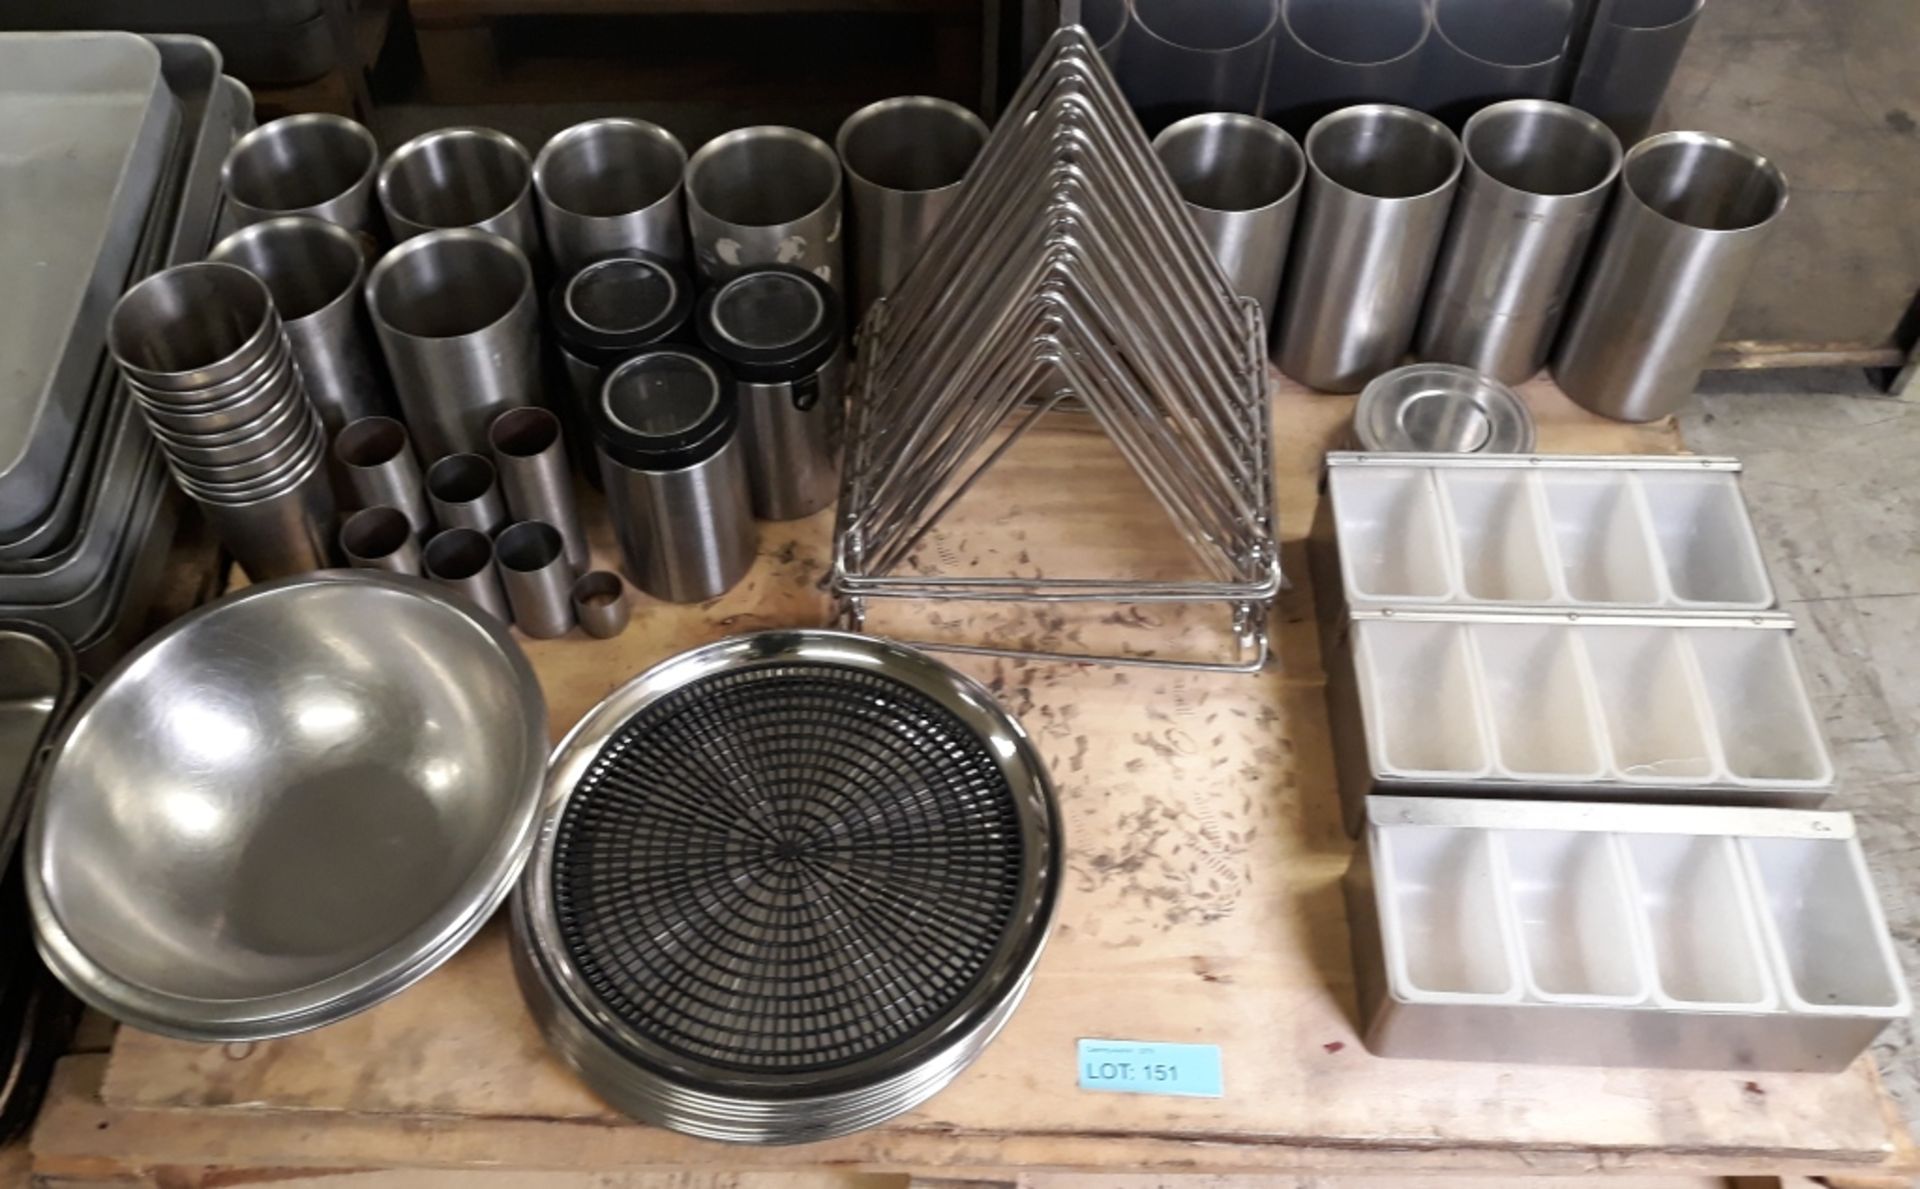 Various storage containers, serving trays, mixing bowls.